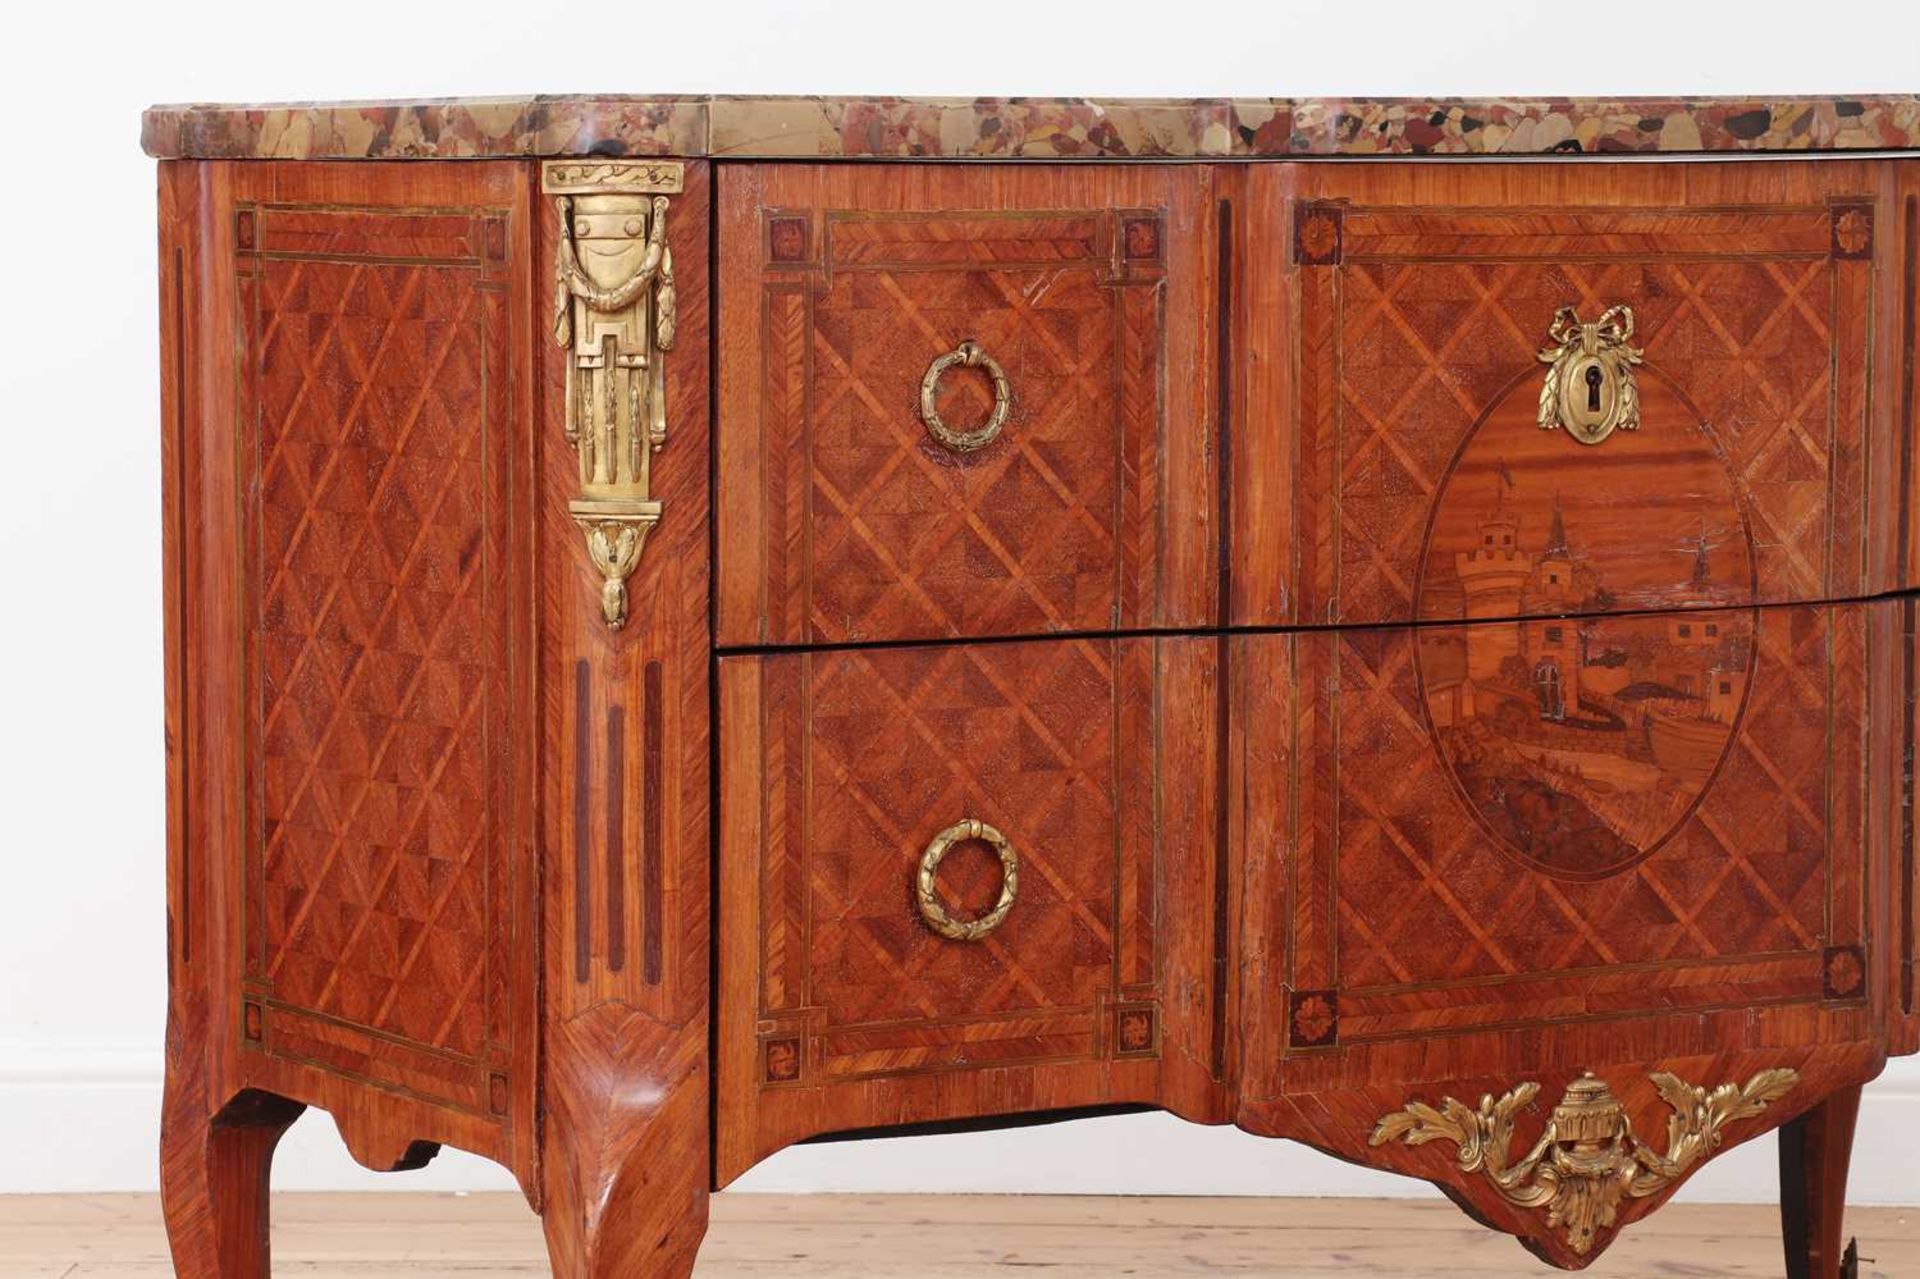 A transitional kingwood, tulipwood and marquetry commode - Image 4 of 26